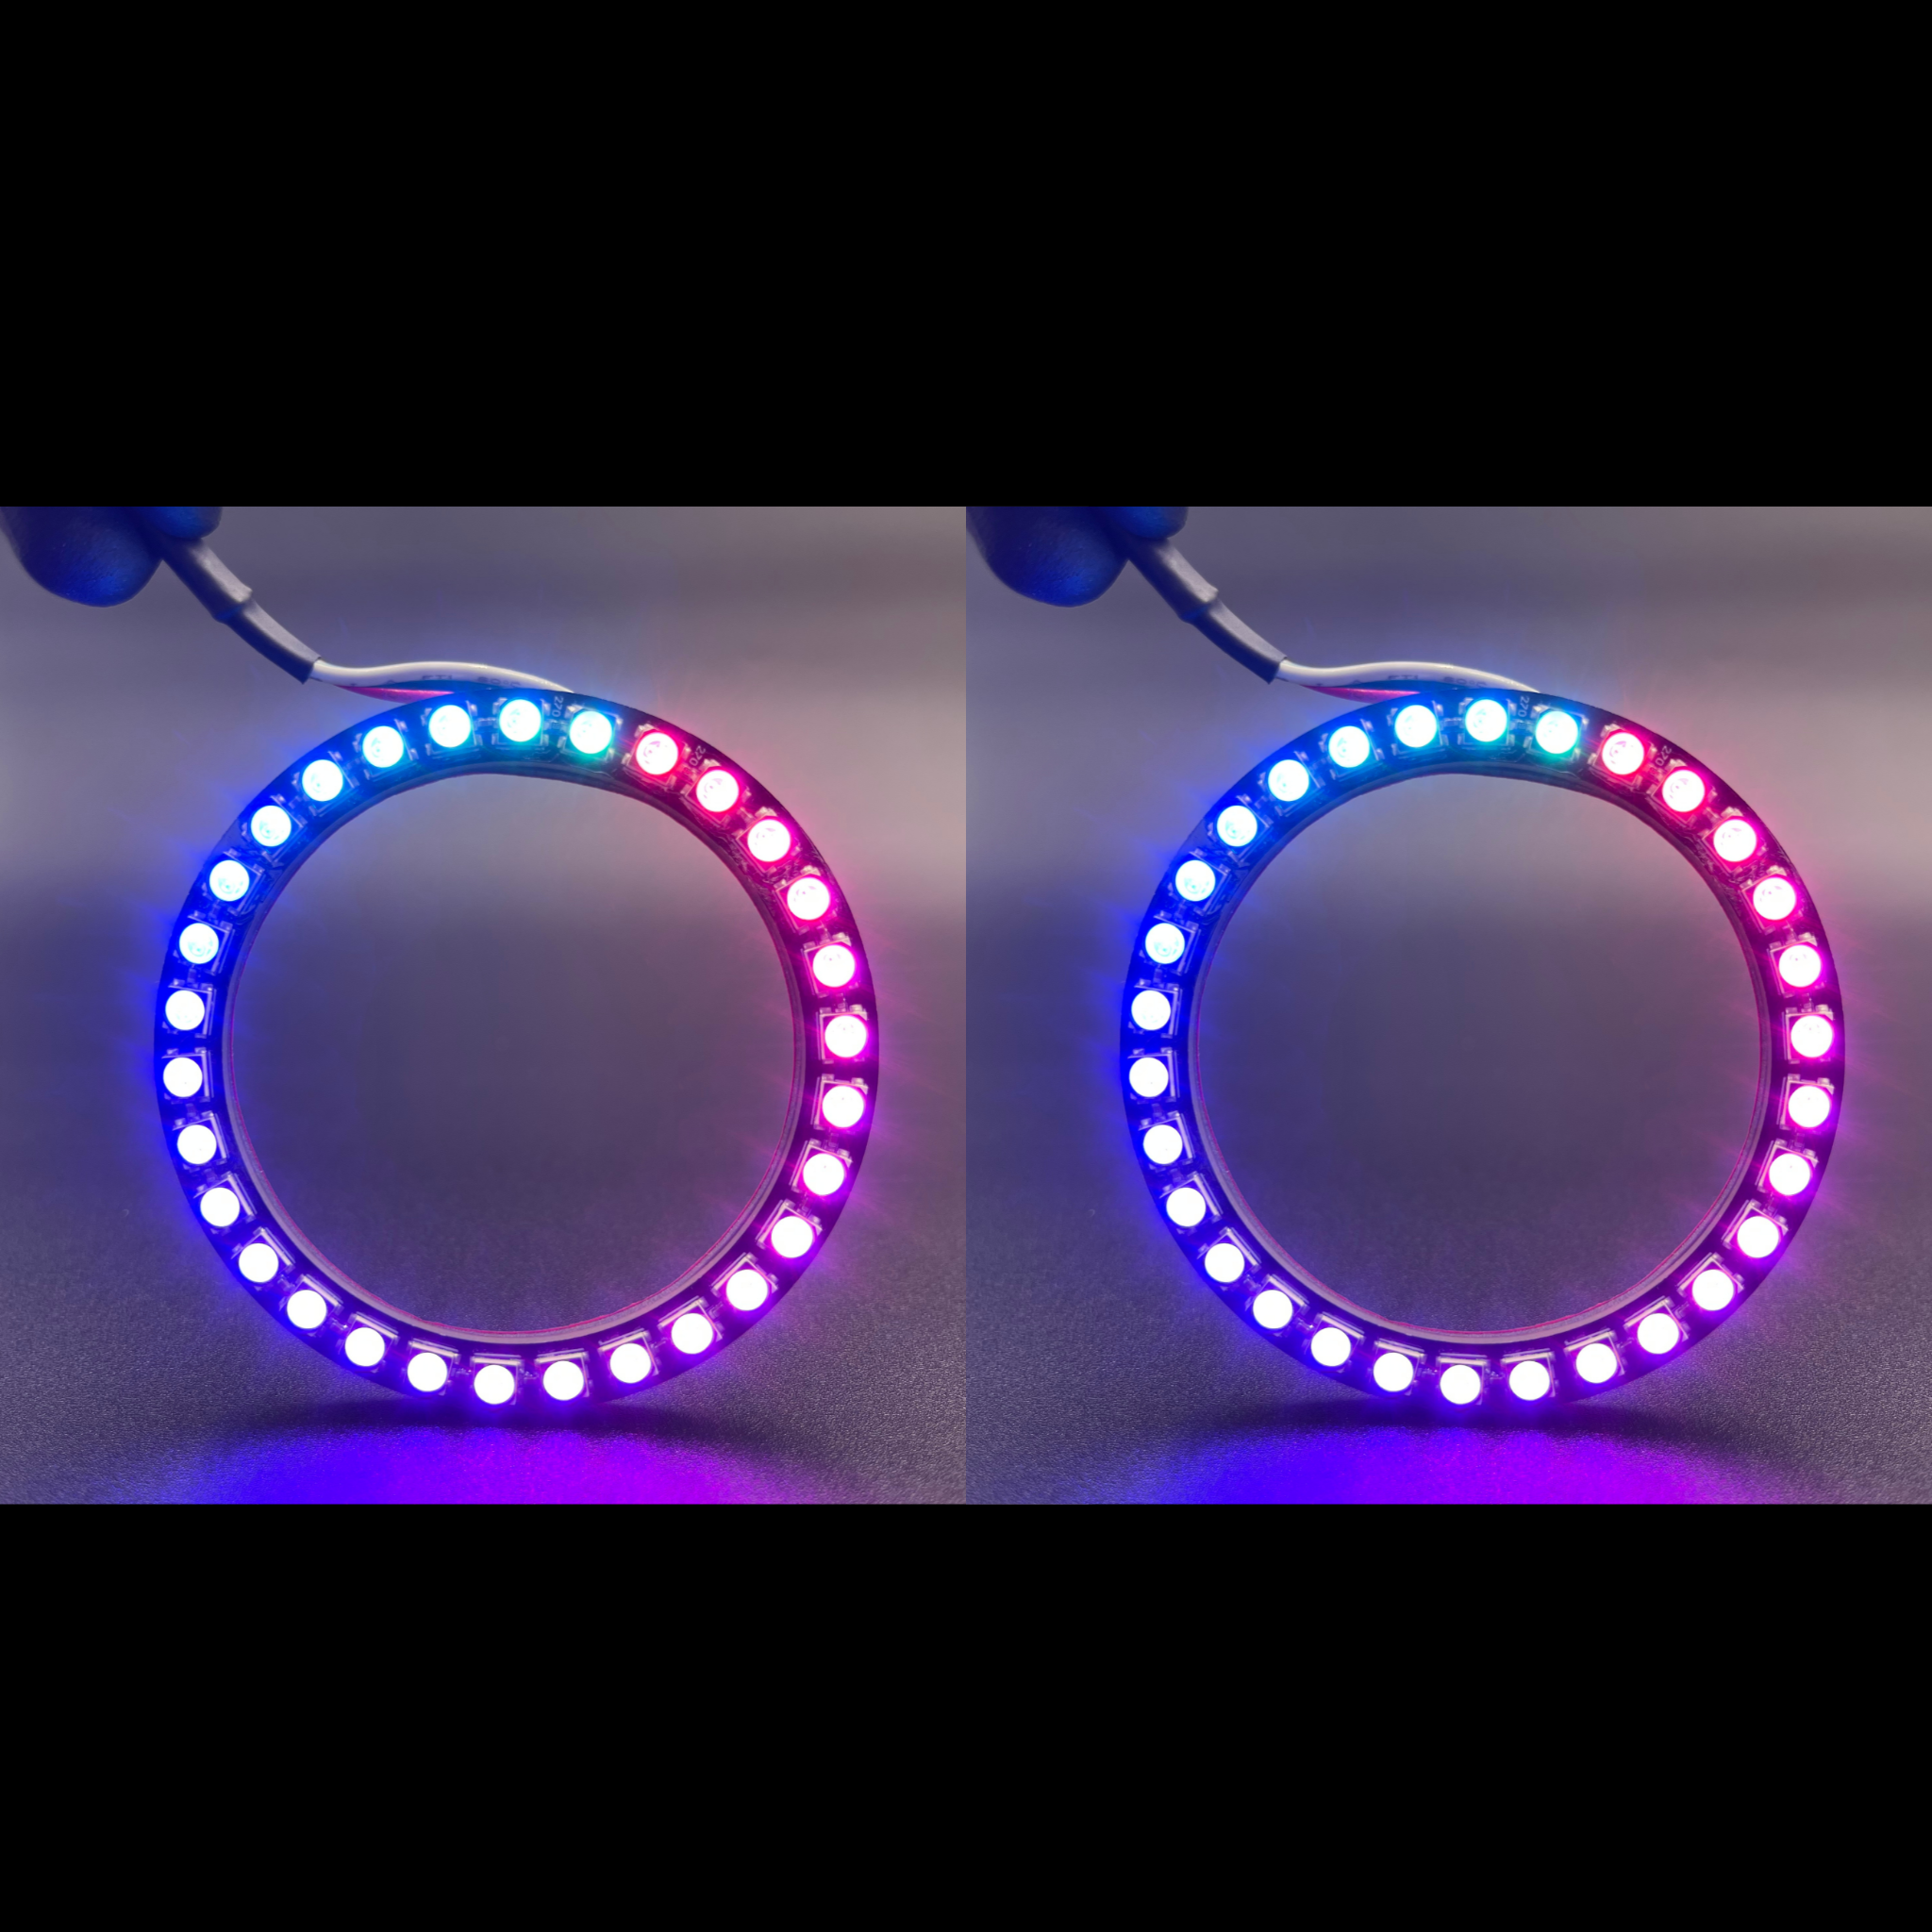 1998-2000 Nissan Frontier Multicolor Halo Kit - RGB Halo Kits Multicolor Flow Series Color Chasing RGBWA LED headlight kit Colorshift Oracle Lighting Trendz OneUpLighting Morimoto theretrofitsource AutoLEDTech Diode Dynamics